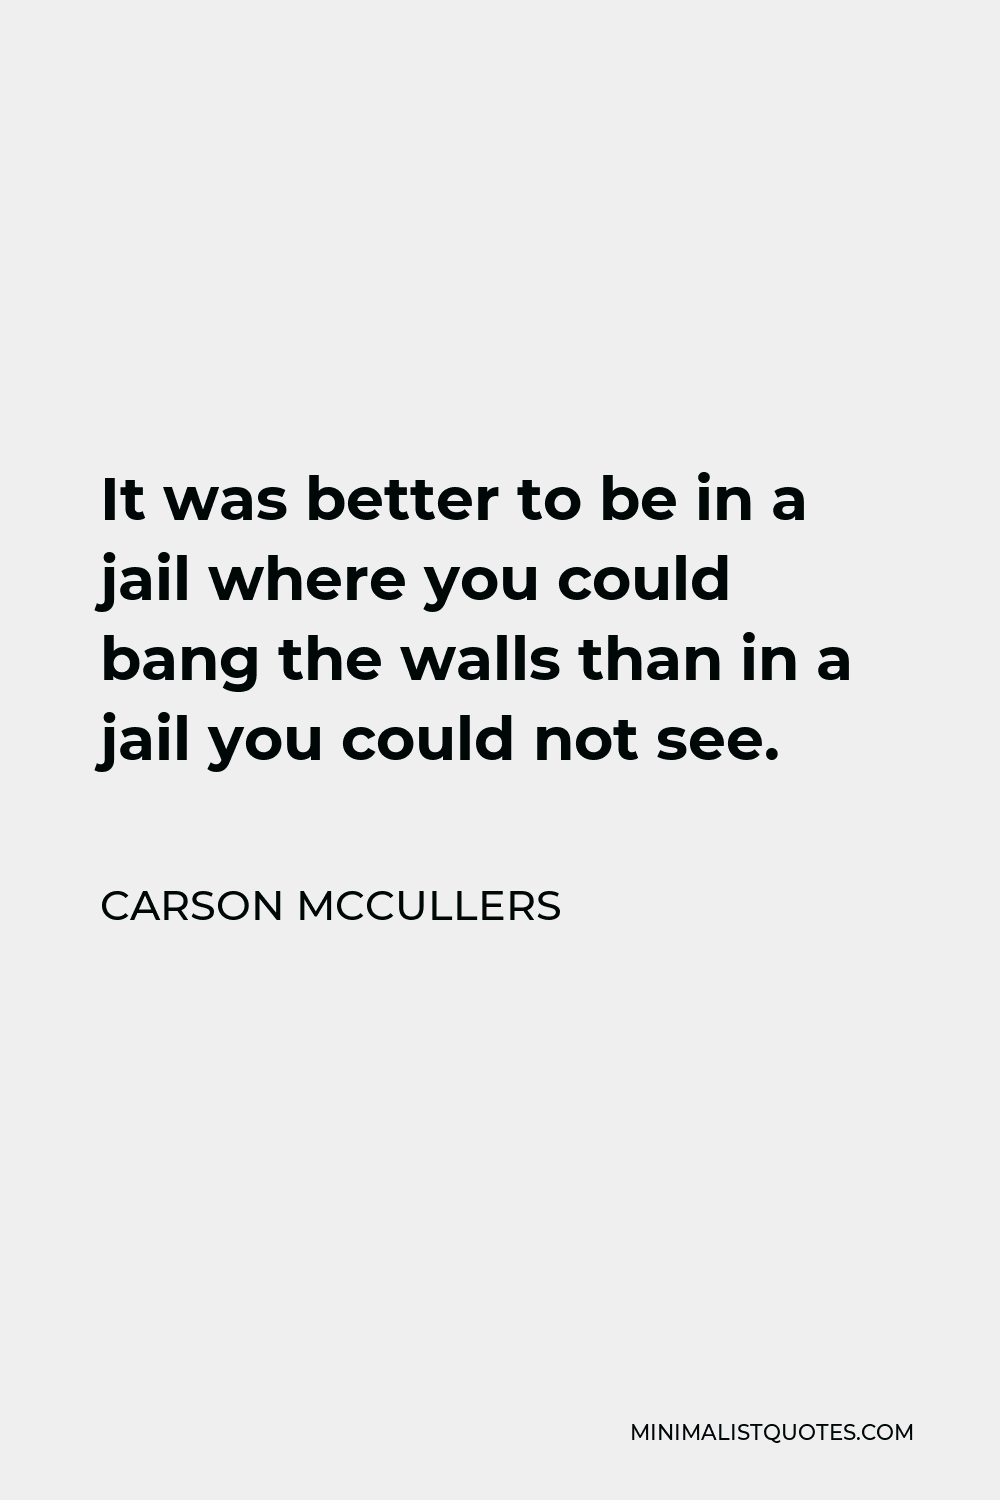 Carson McCullers Quote - It was better to be in a jail where you could bang the walls than in a jail you could not see.